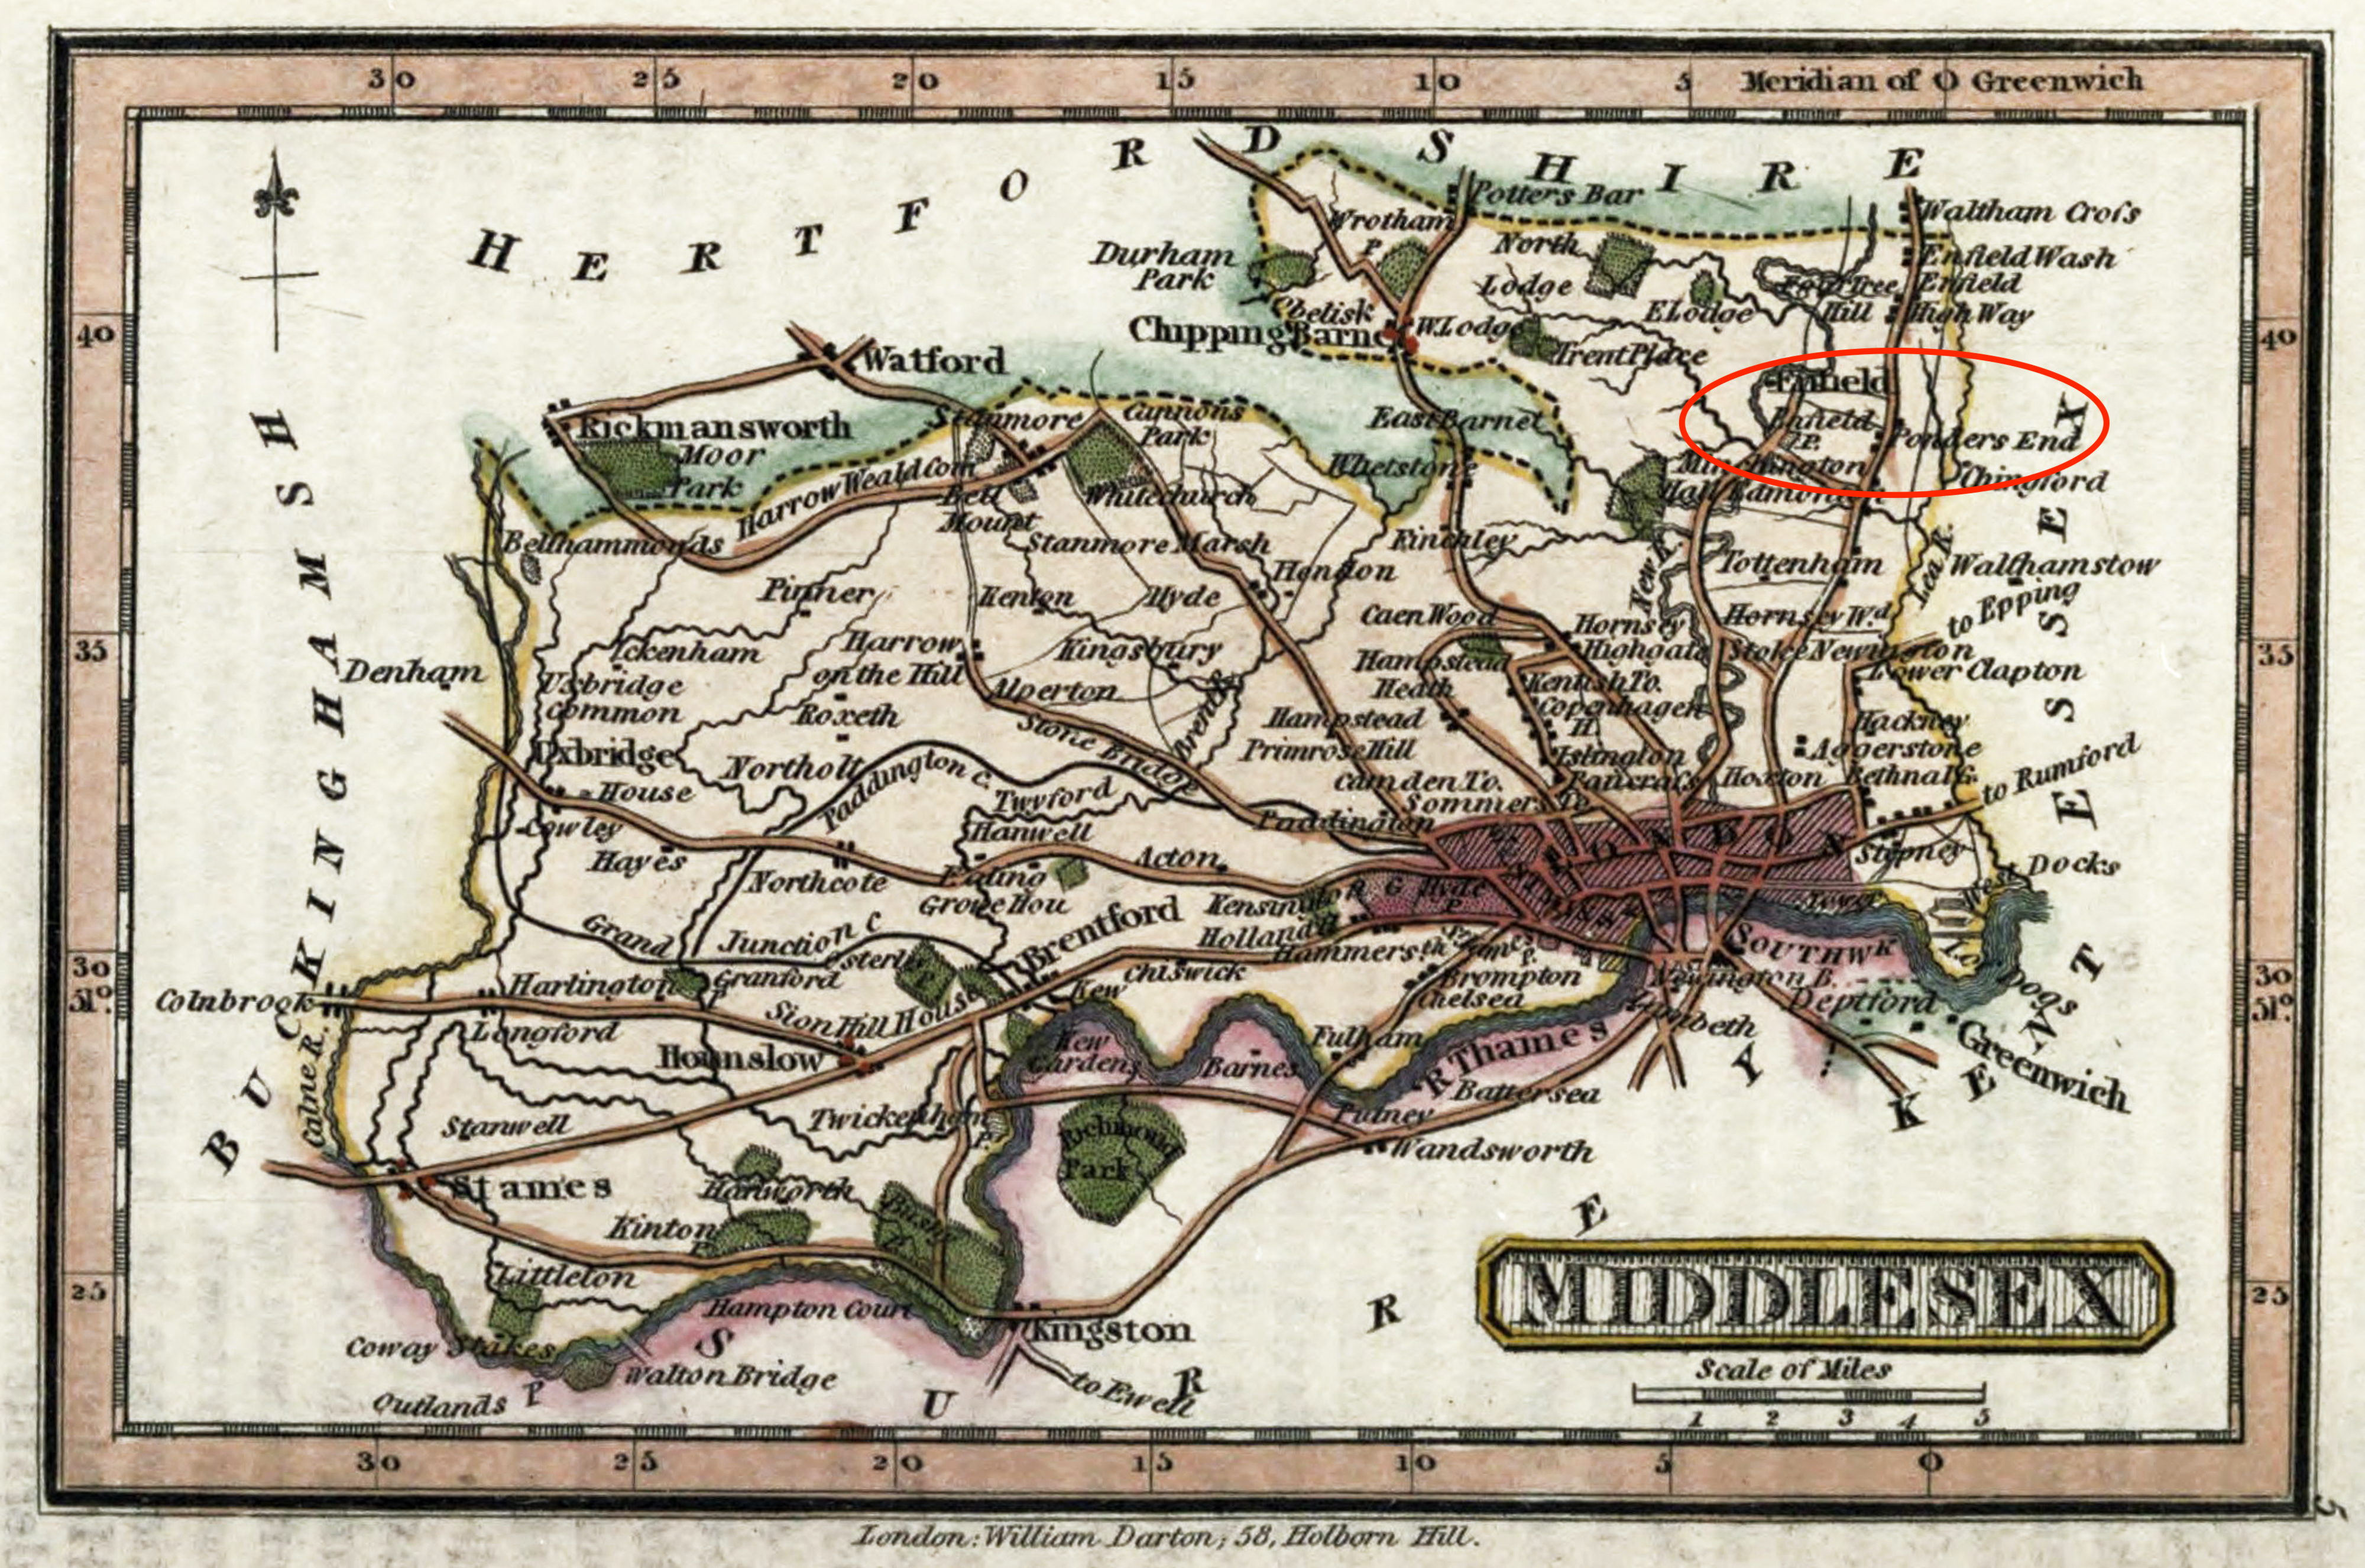 Middlesex, with Enfield circled (and Ponders End). Click to enlarge.